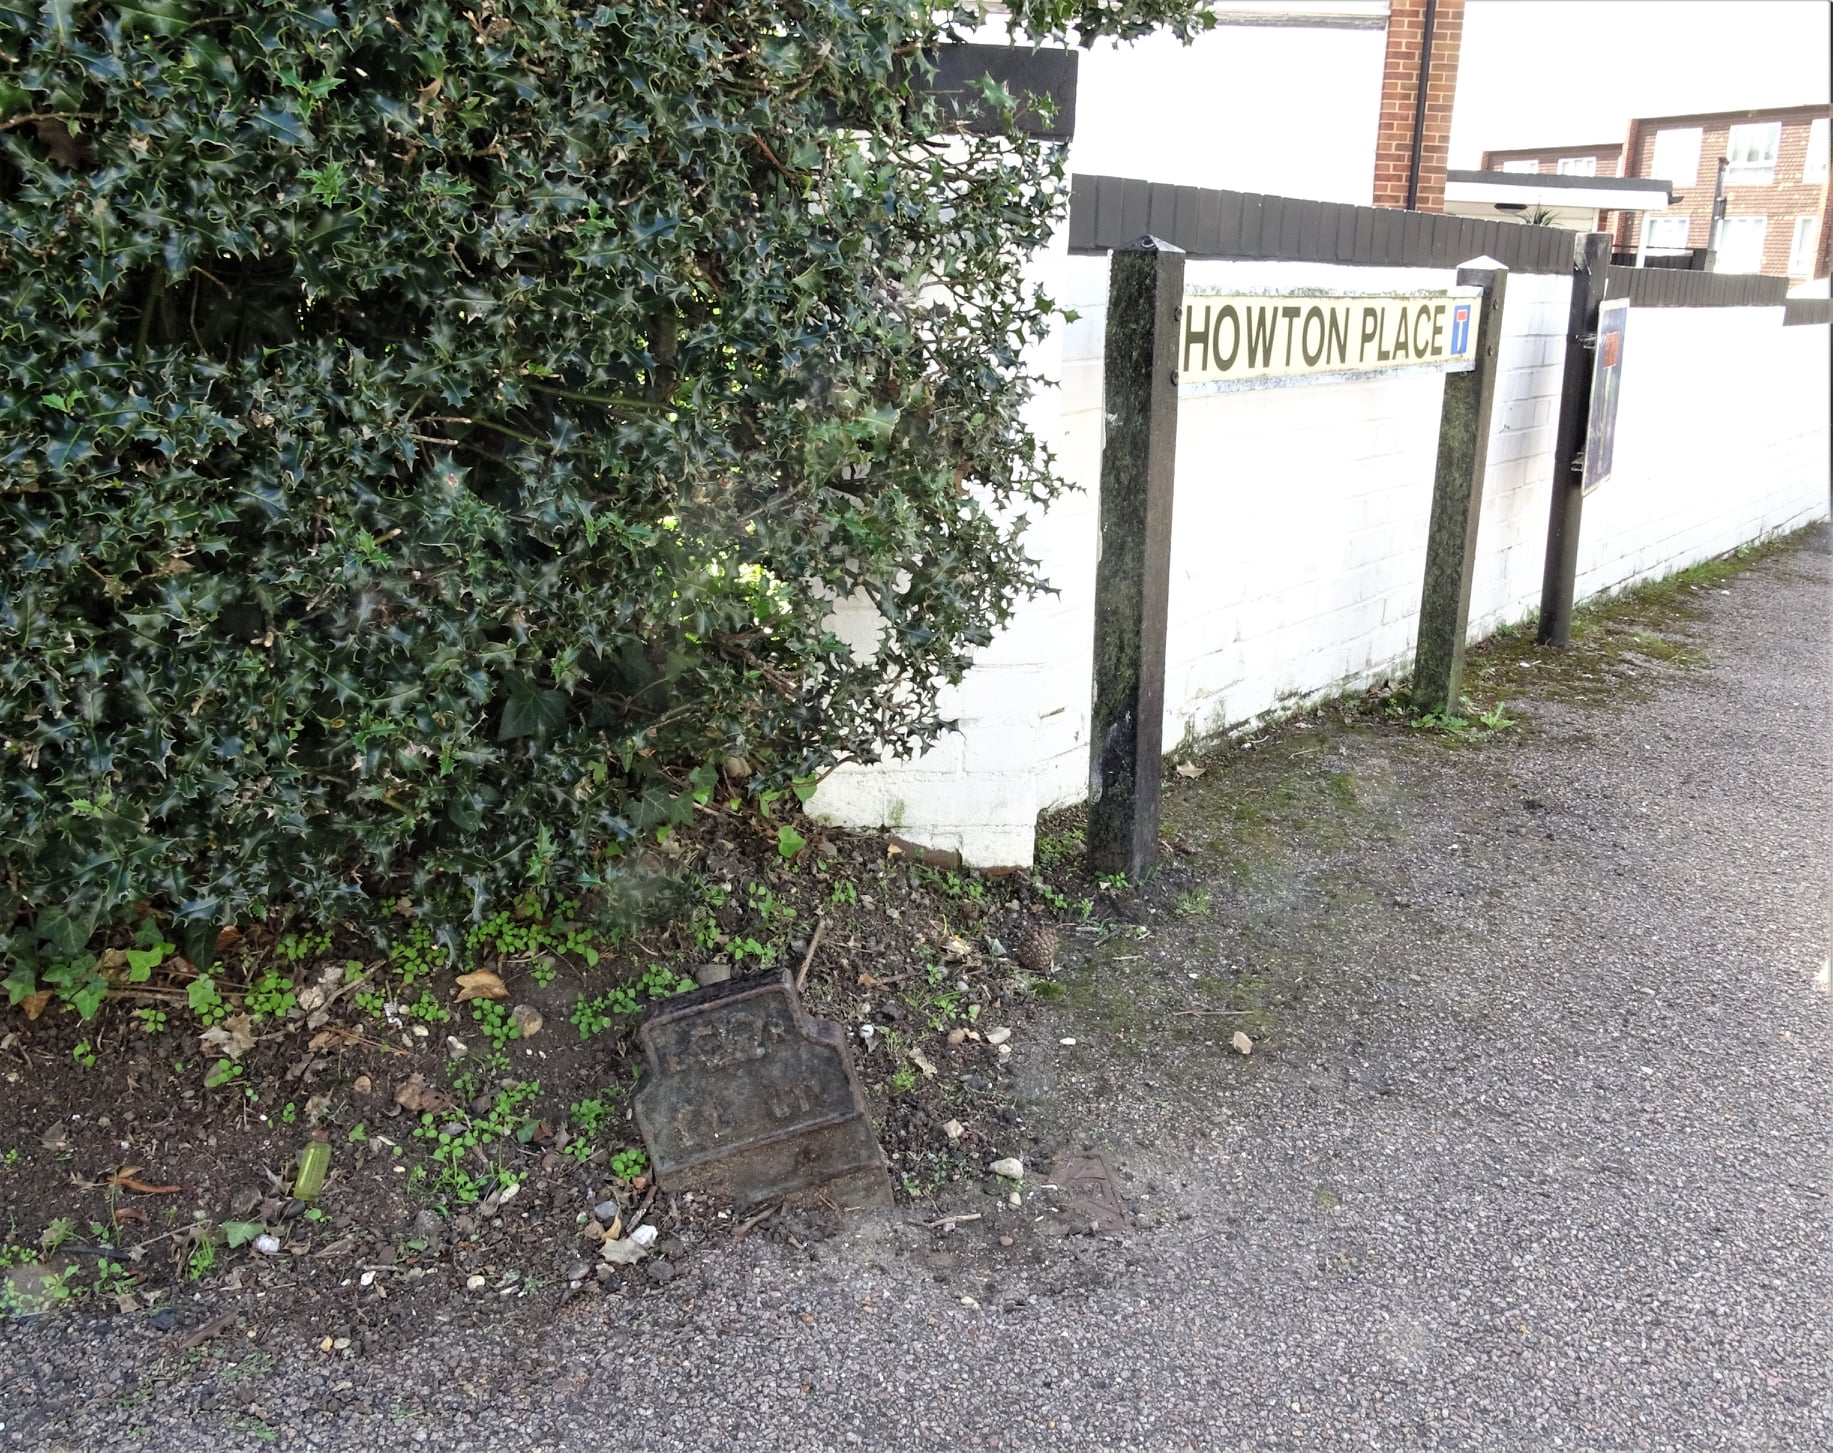 Telegraph cable marker post at opp. 66 High Road, Bushey, Herts by Stephen Danzig 